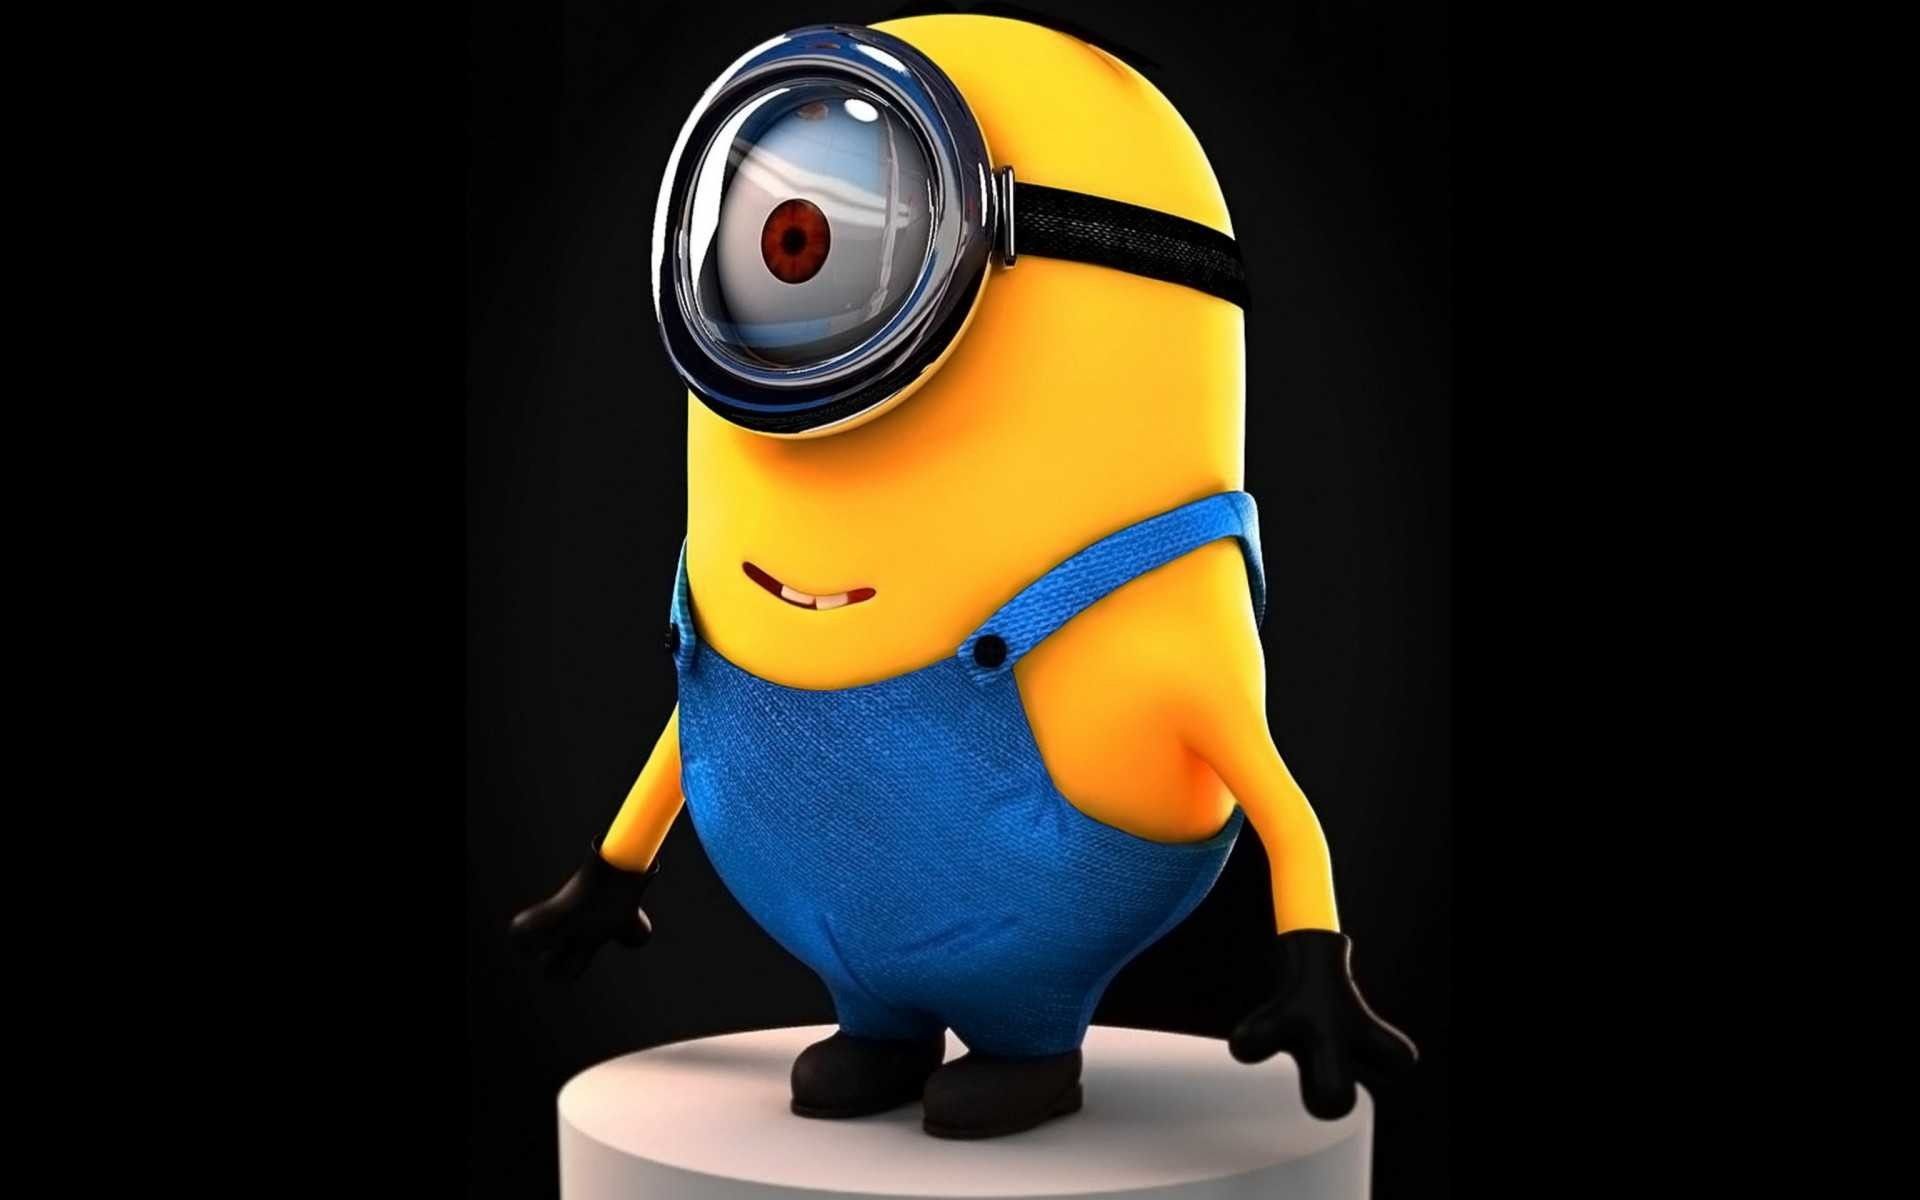 Minions Amoled Wallpapers - Wallpaper Cave